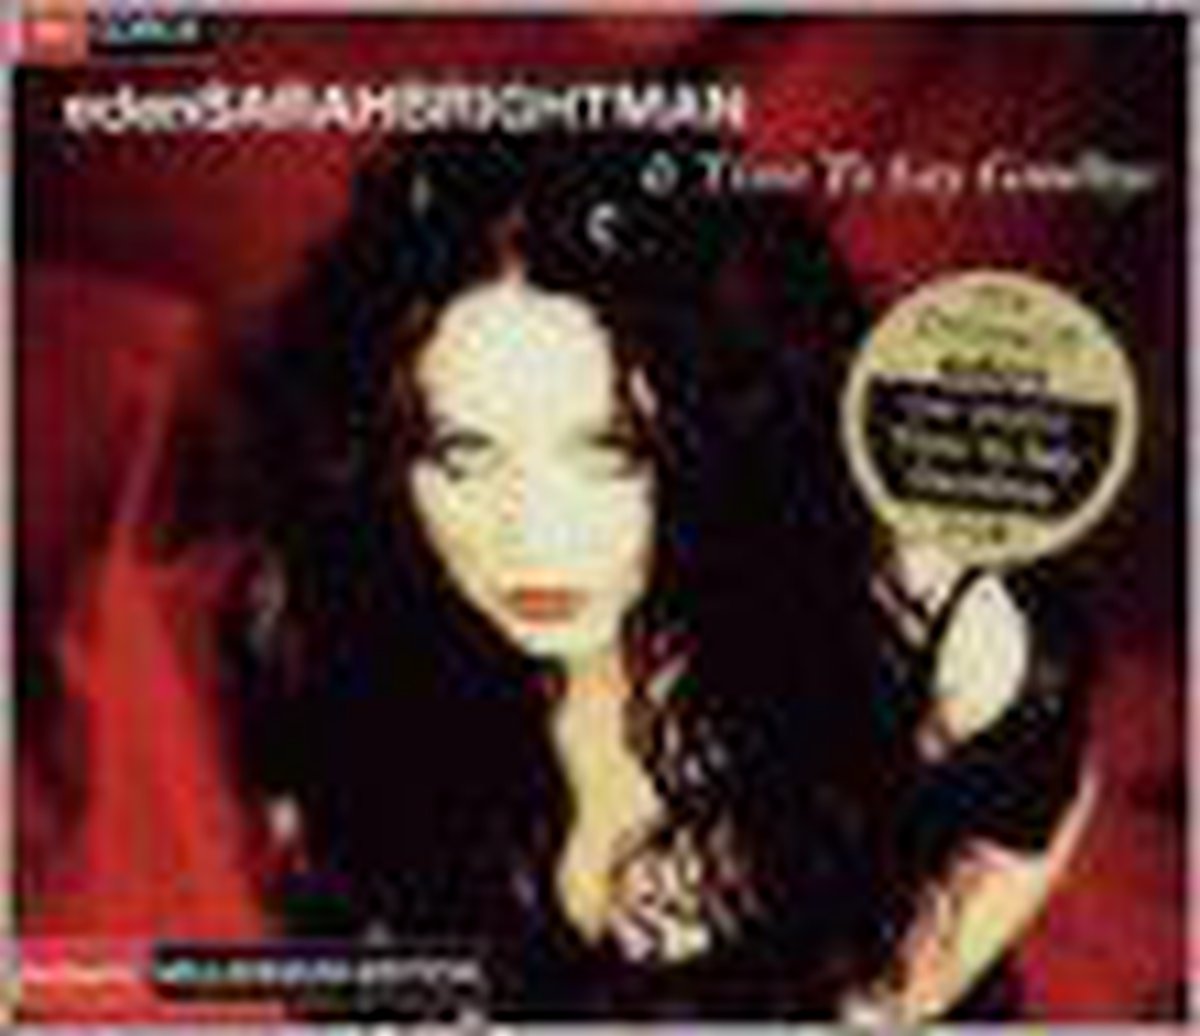 Eden & Time To Say Goodby - Sarah Brightman & Andrea Bocelli